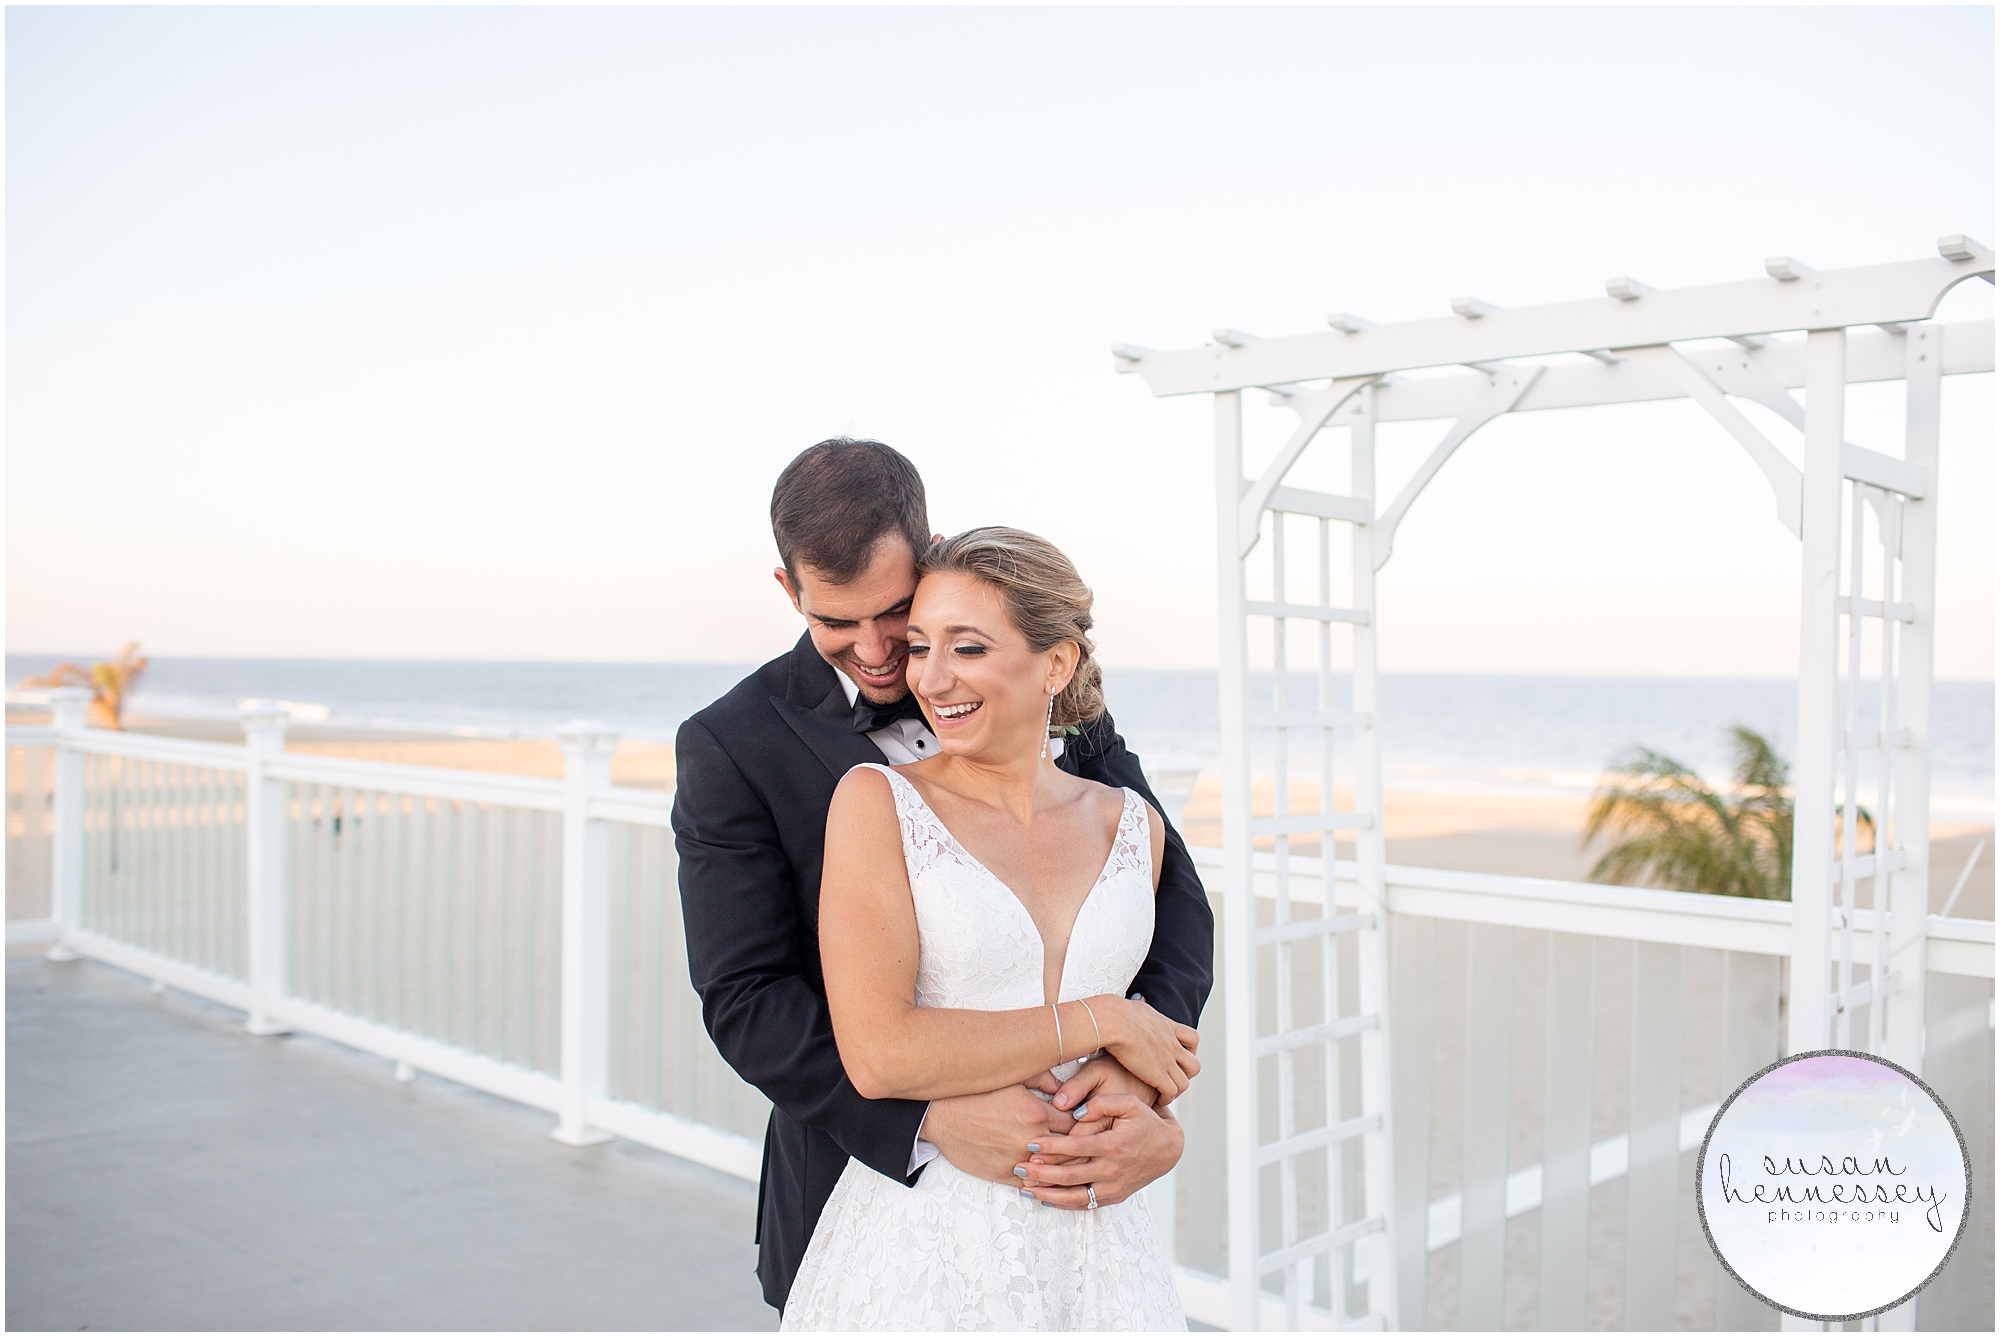 Windows on the Water at Surfrider Beach Club is one of the best Jersey Shore wedding venues because of the stunning water views